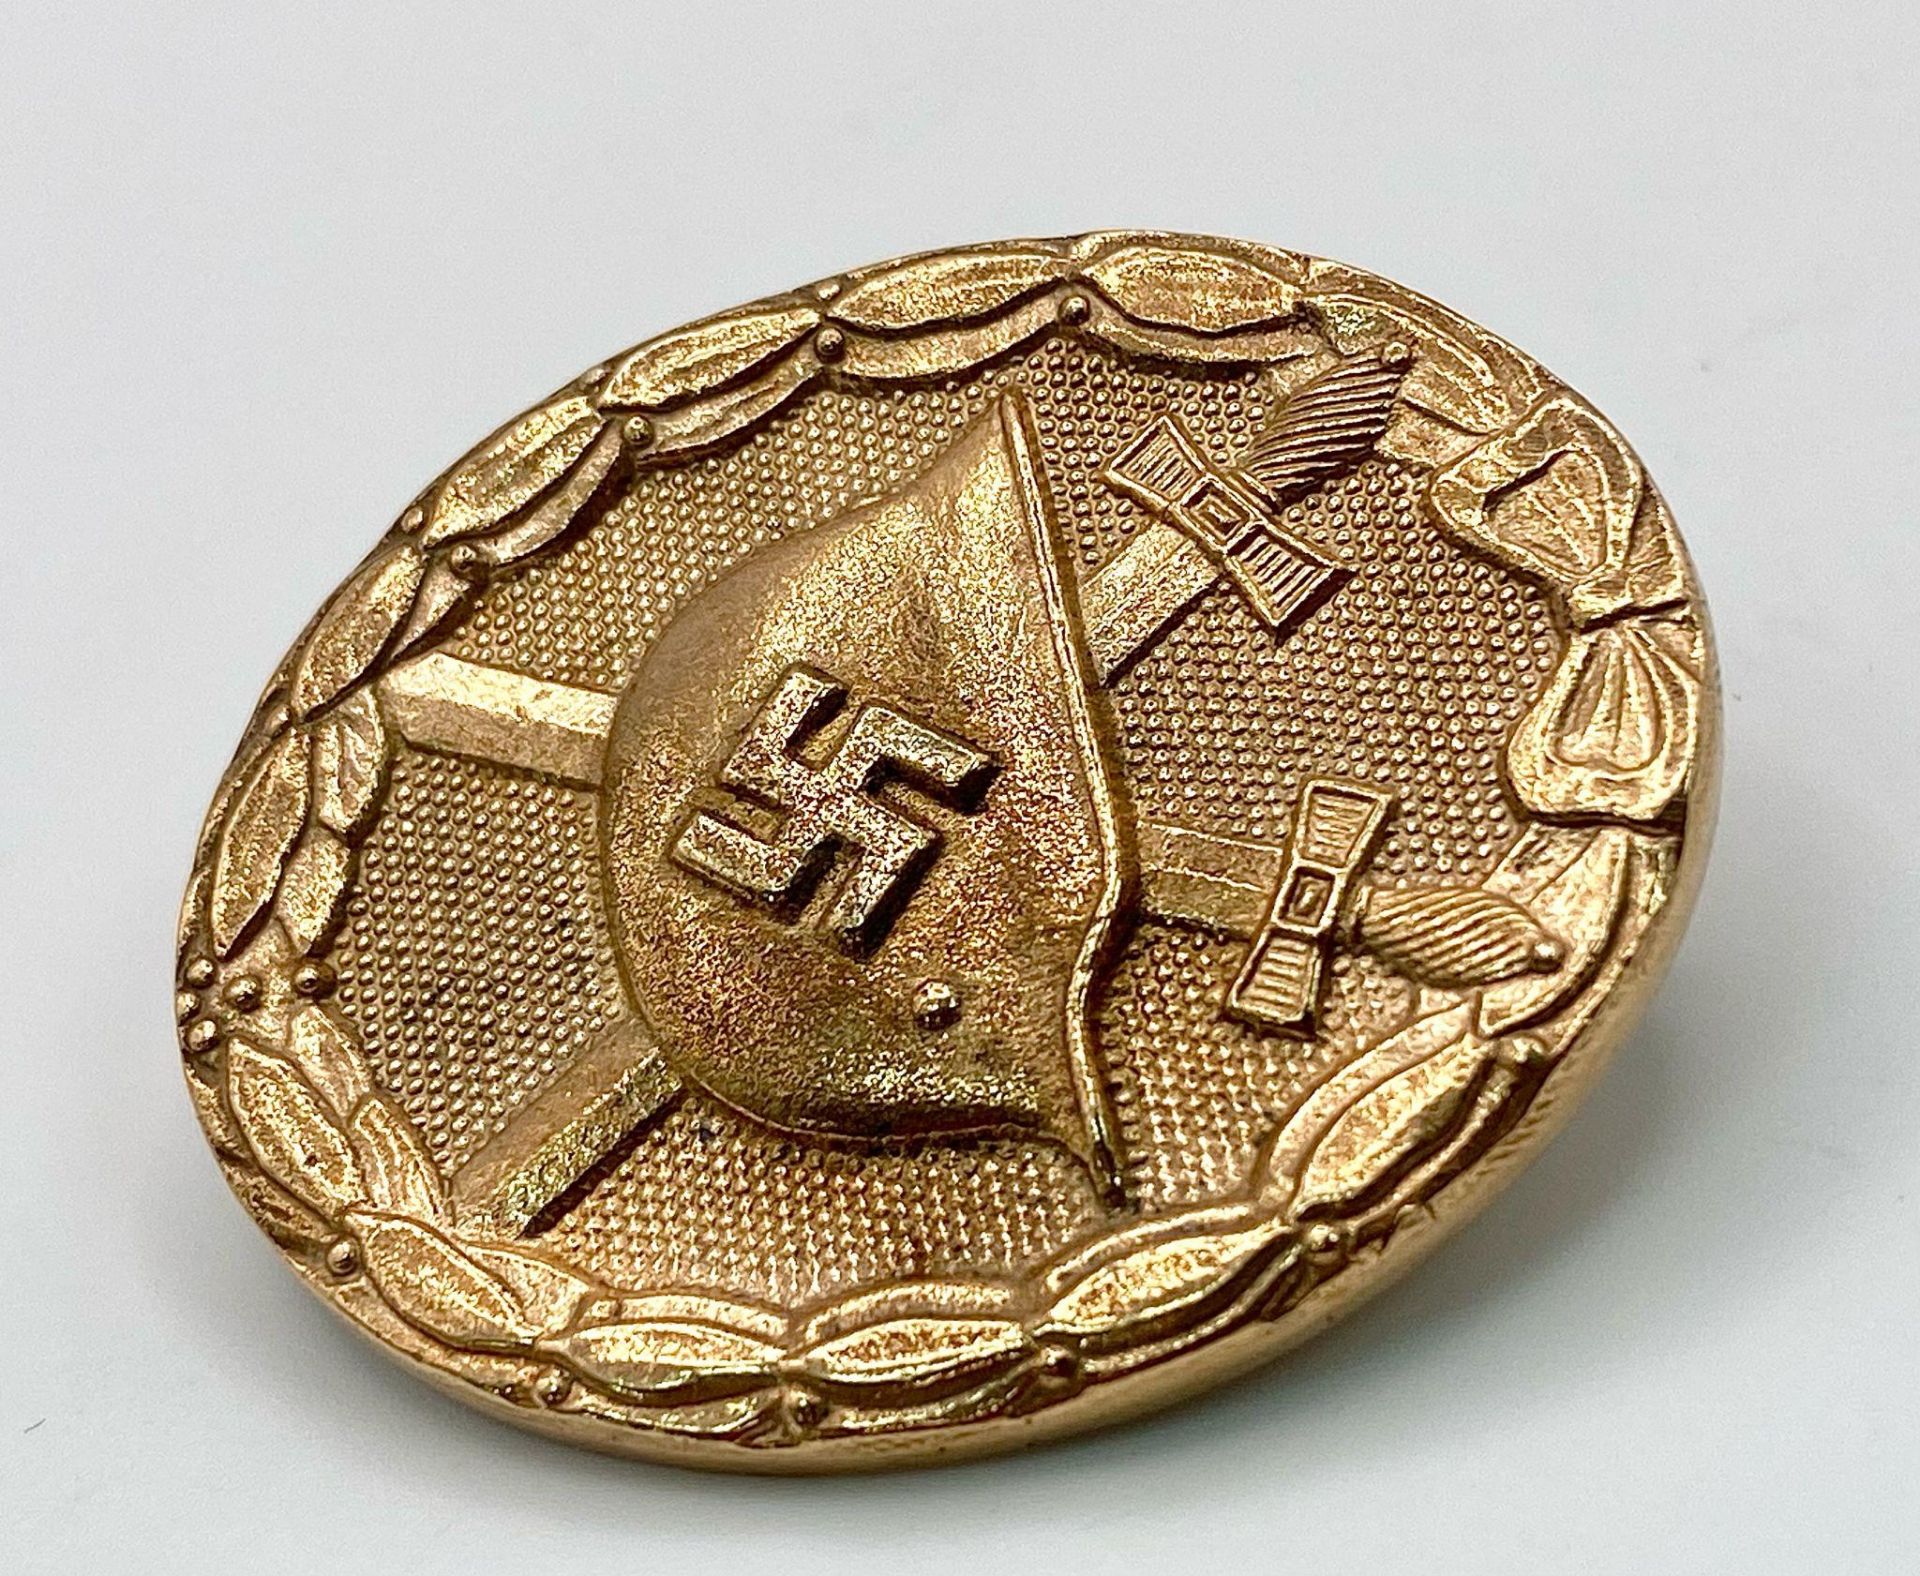 WW2 German Gold Wound Badge (1st class, which could be awarded posthumously) for five or more